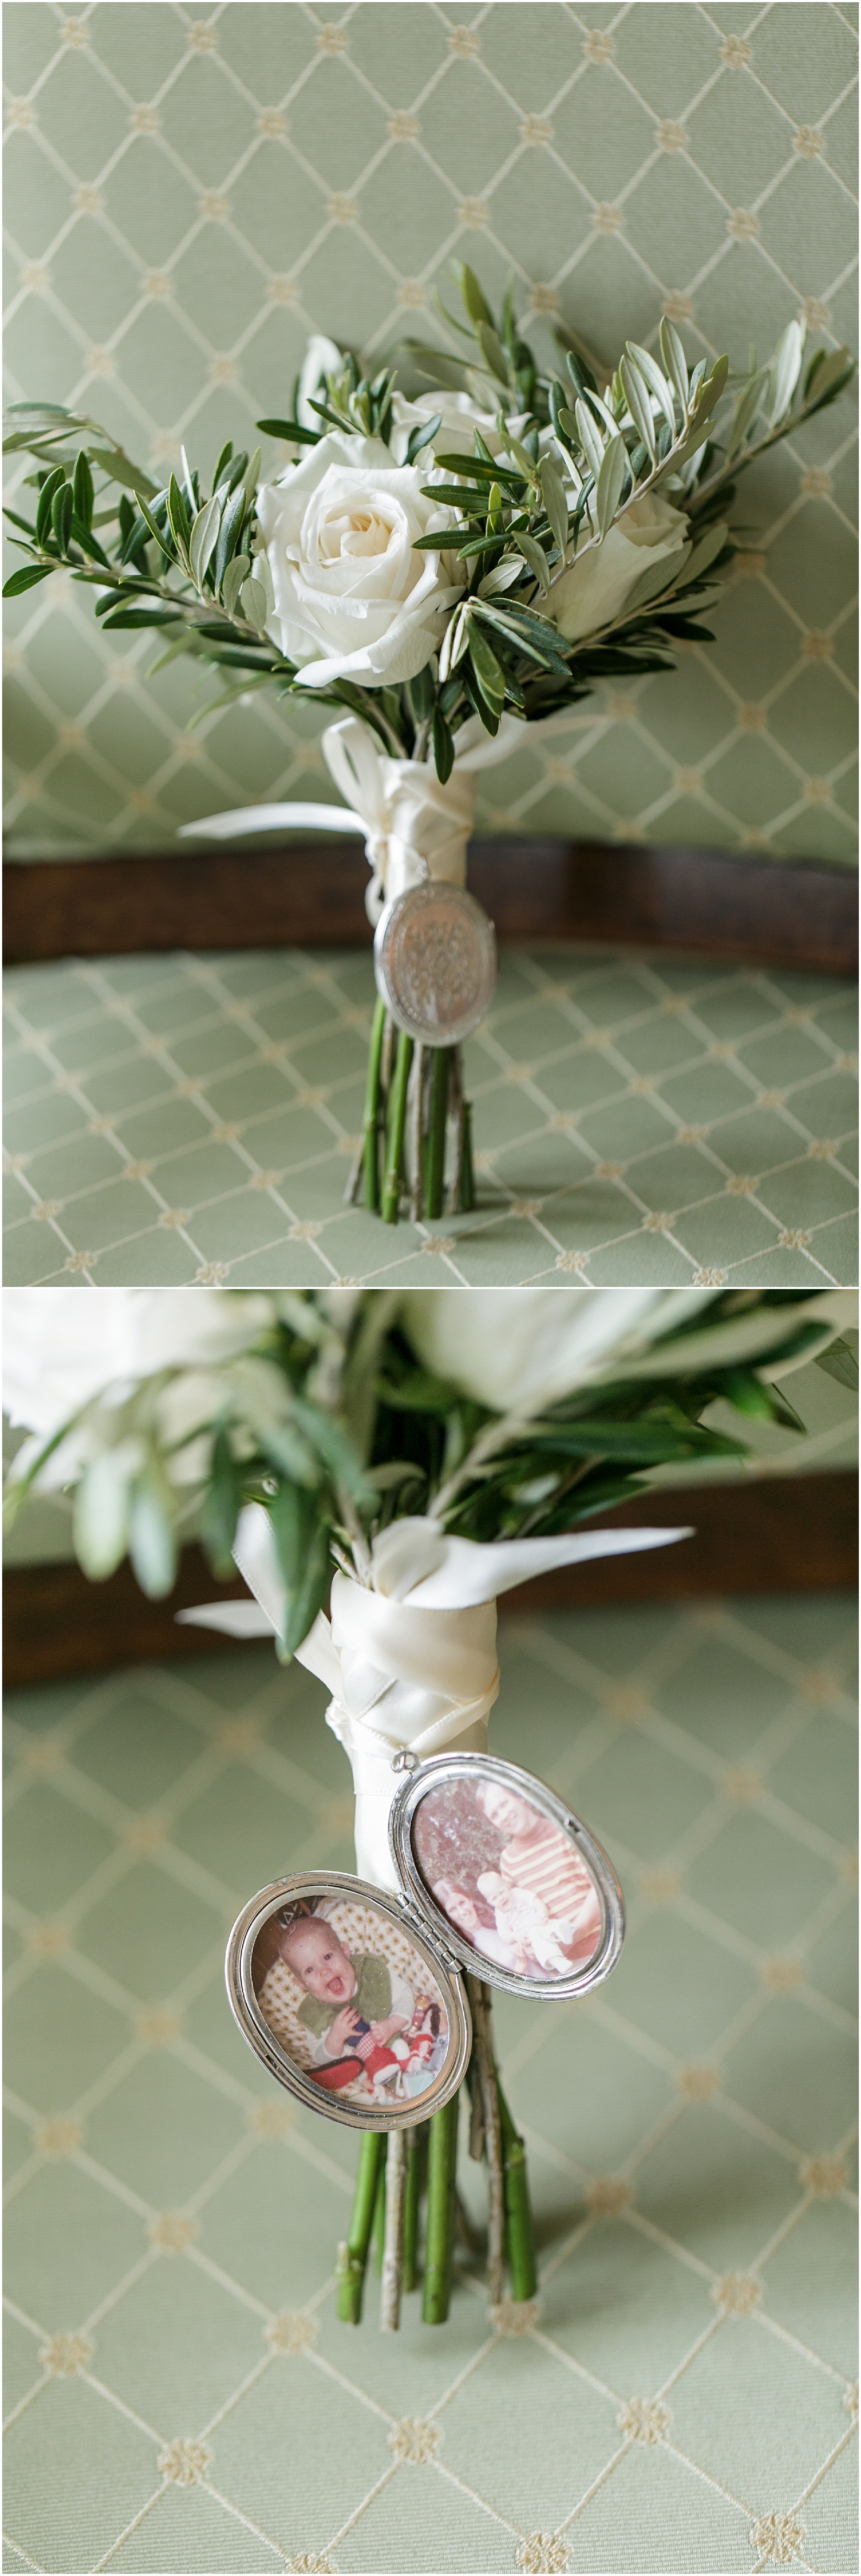 Small green and white wedding bouquet with a locket attached around the stems